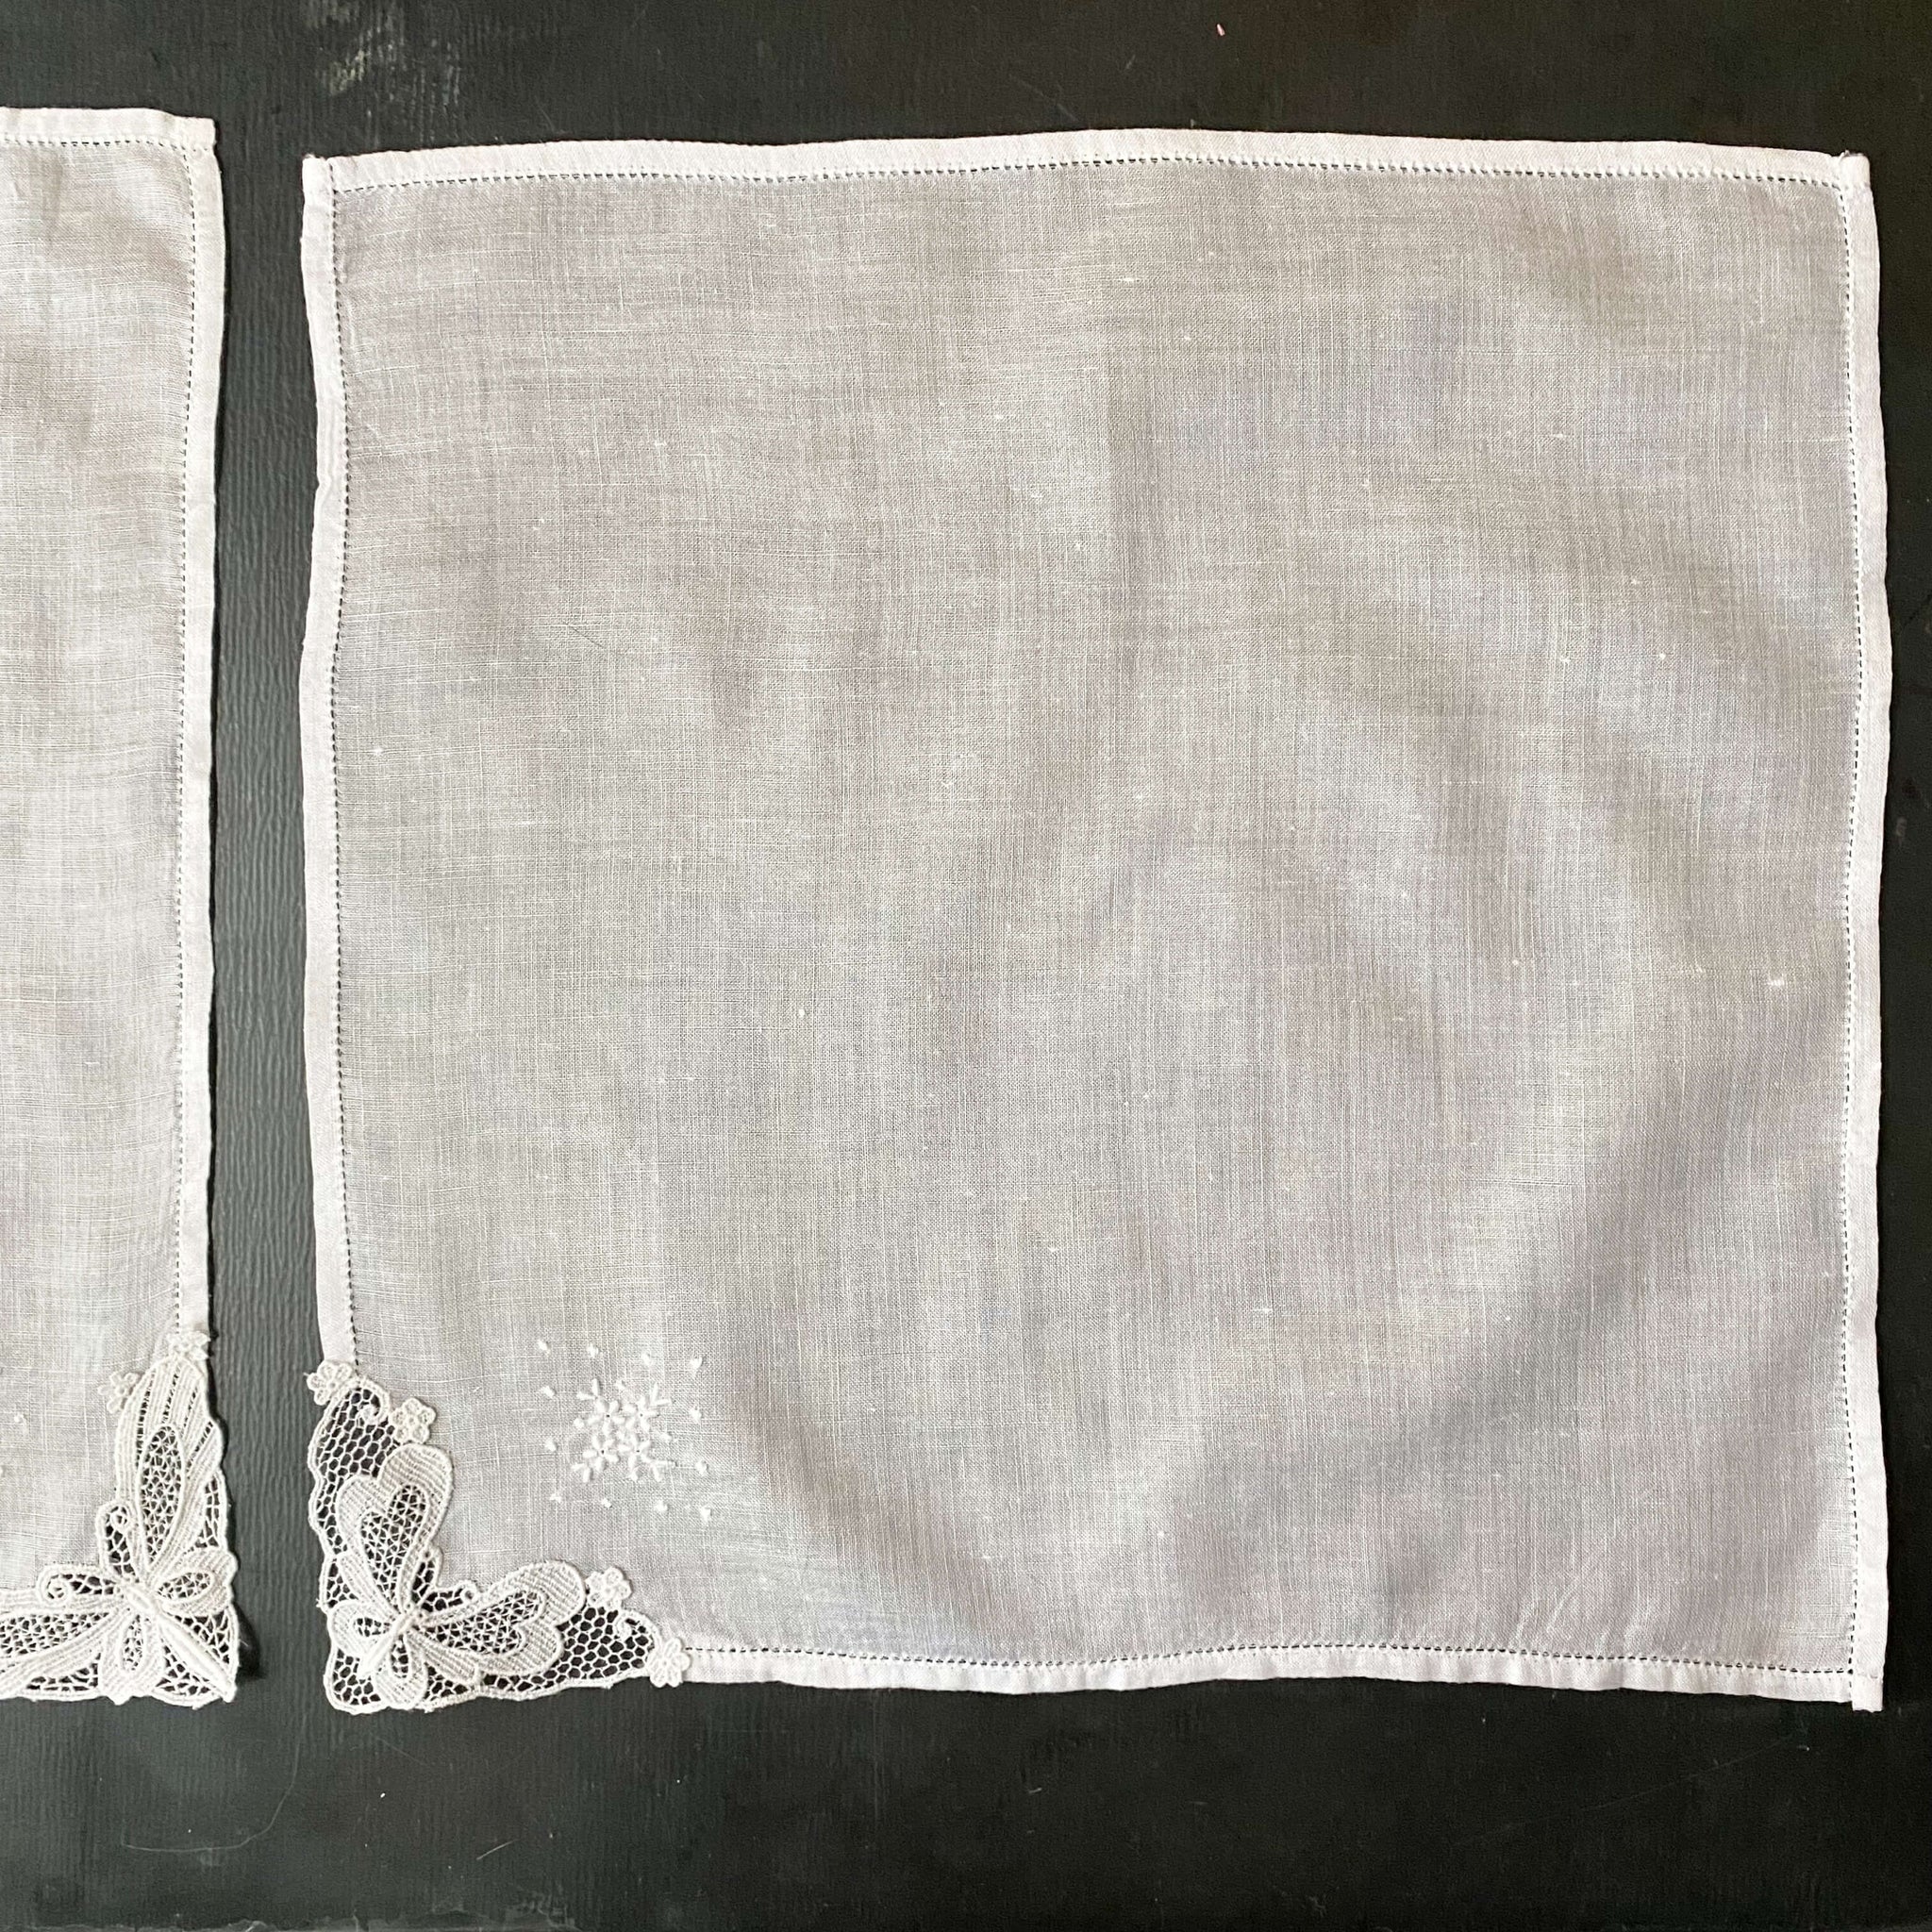 Vintage All White Embroidered Handkerchiefs with Lace Butterfly Corners - Set of Two